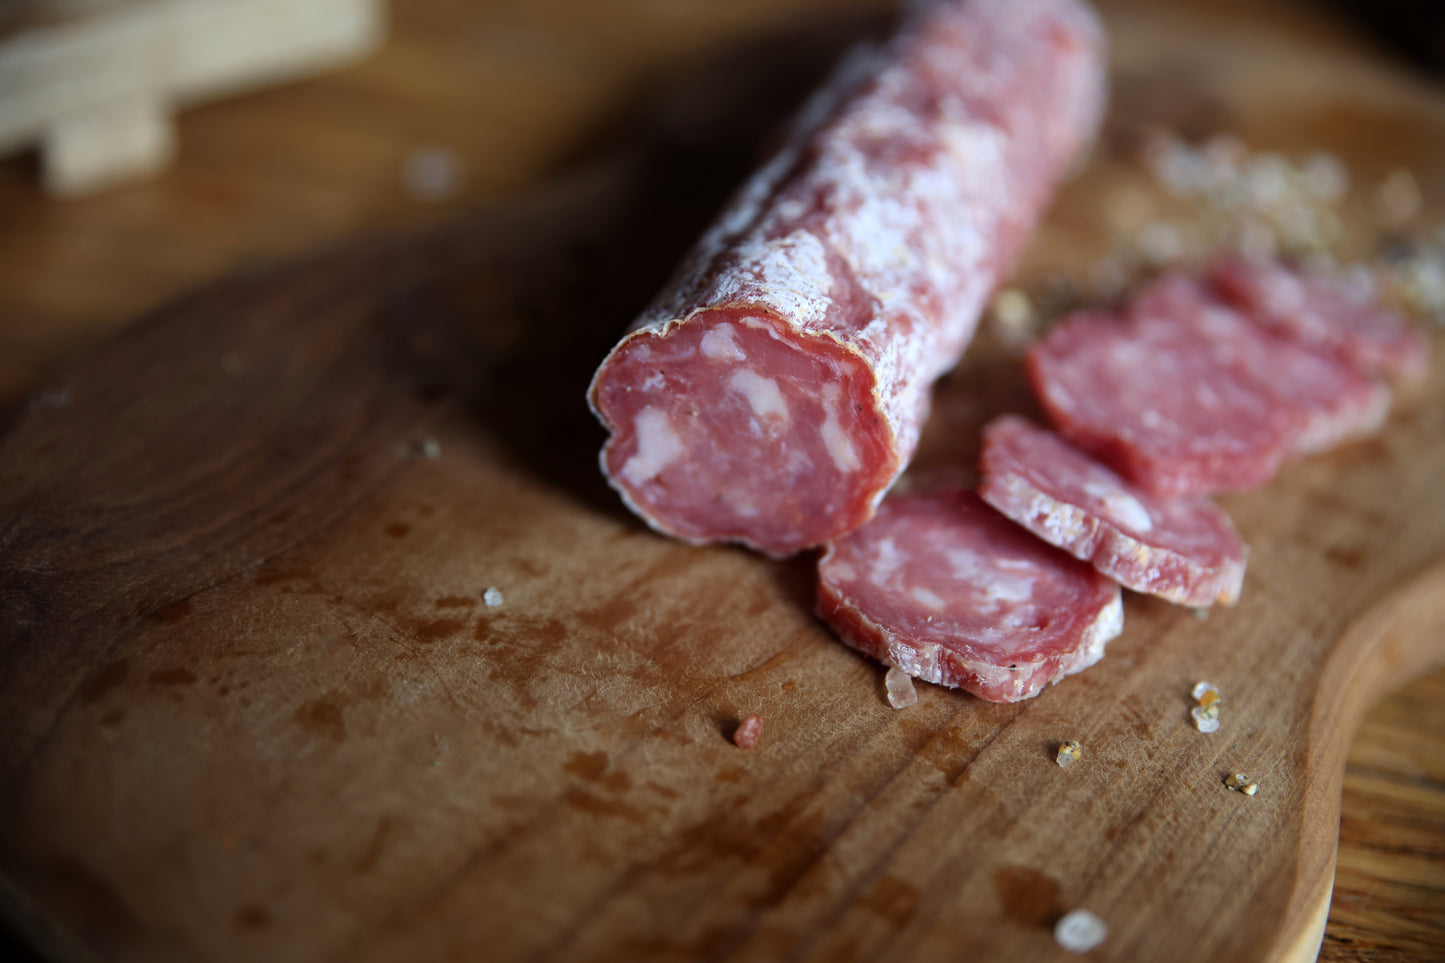 Salchichon Full Salami Approx 780g random weight packet. Regular price $25.00 AUD [You are guaranteed to receive at least 750g of product, equivalent price of $33.33 per kg.]